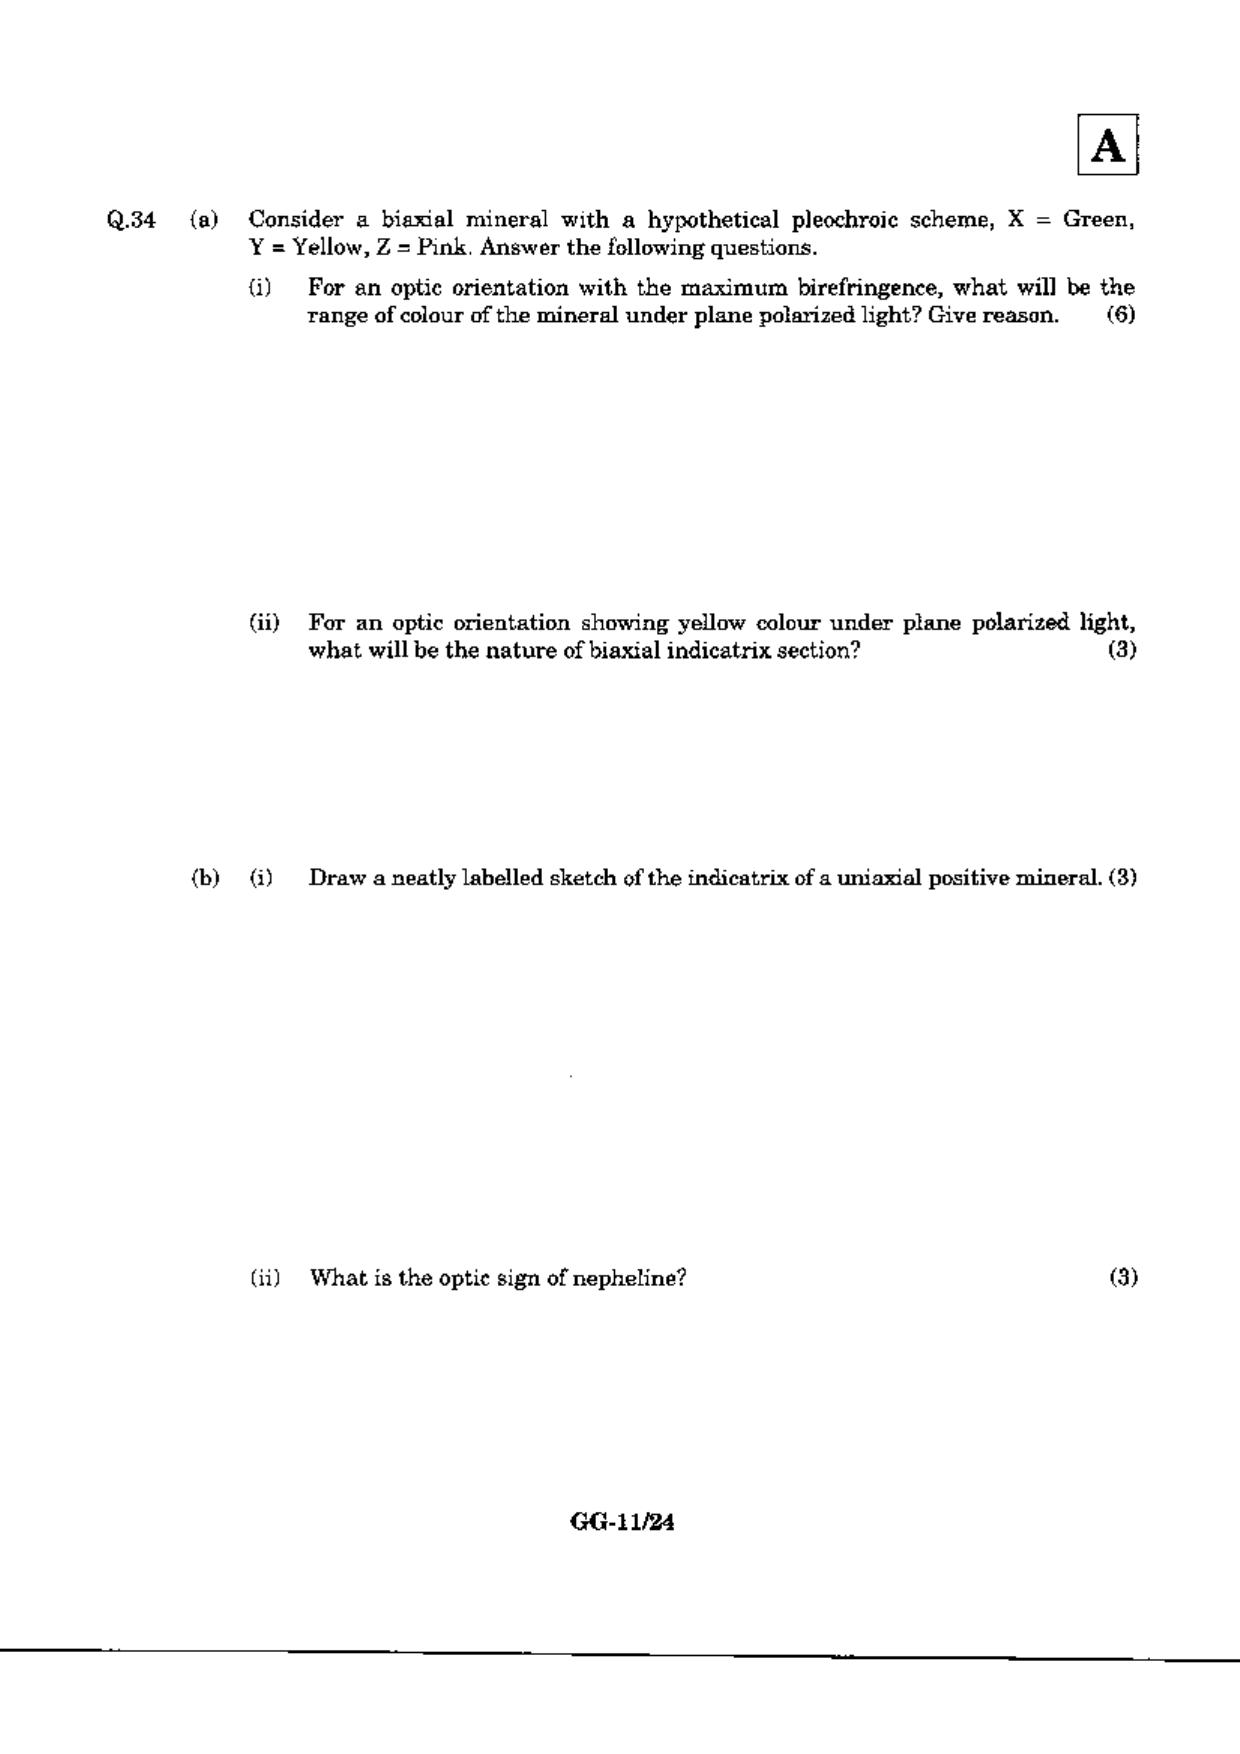 JAM 2010: GG Question Paper - Page 13